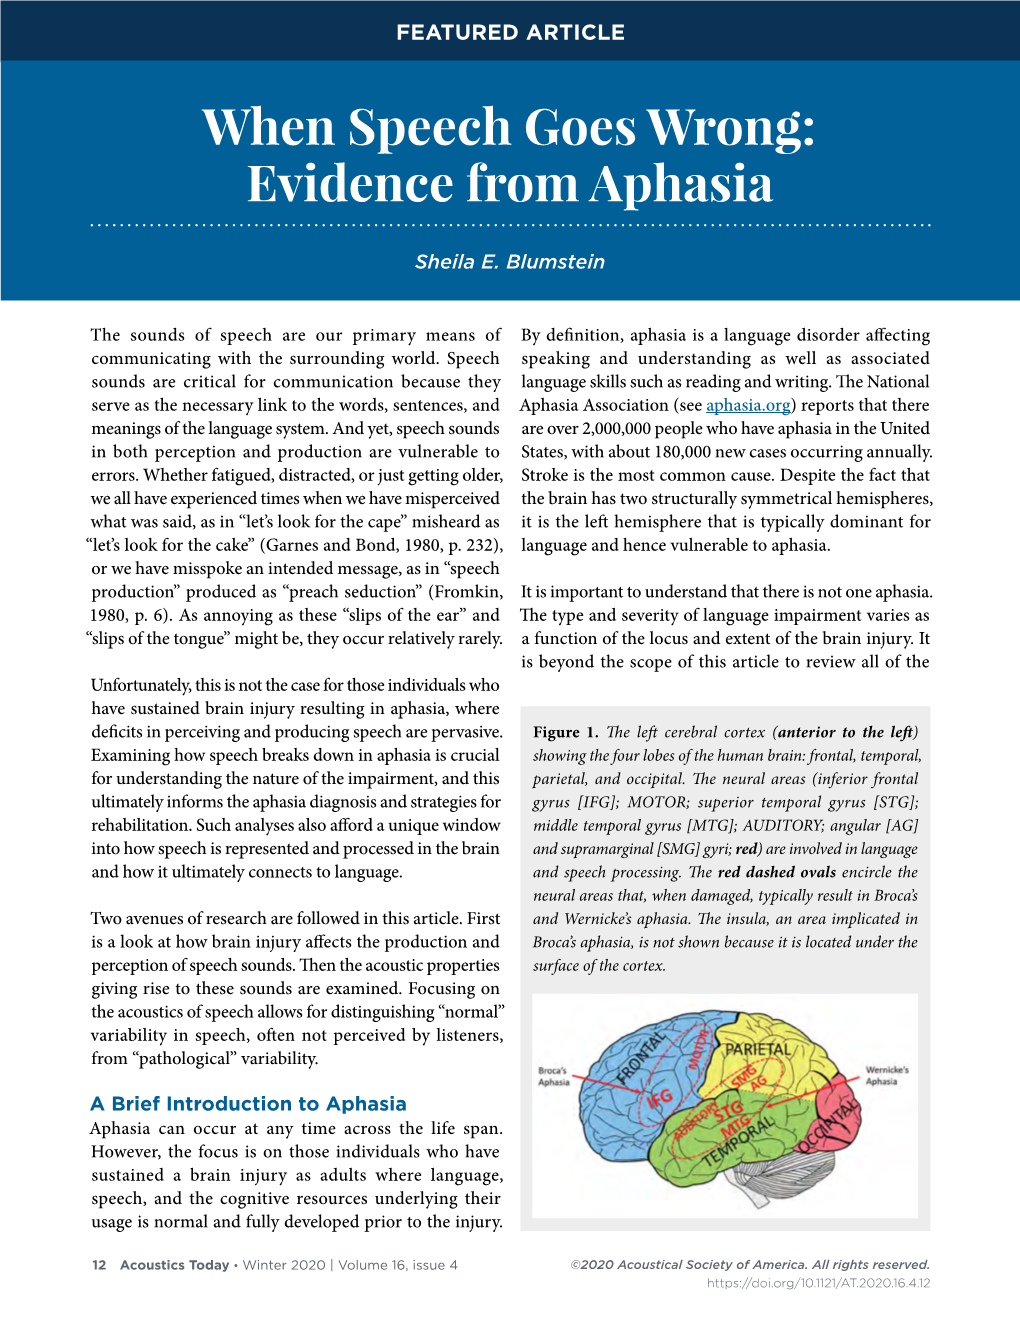 When Speech Goes Wrong: Evidence from Aphasia